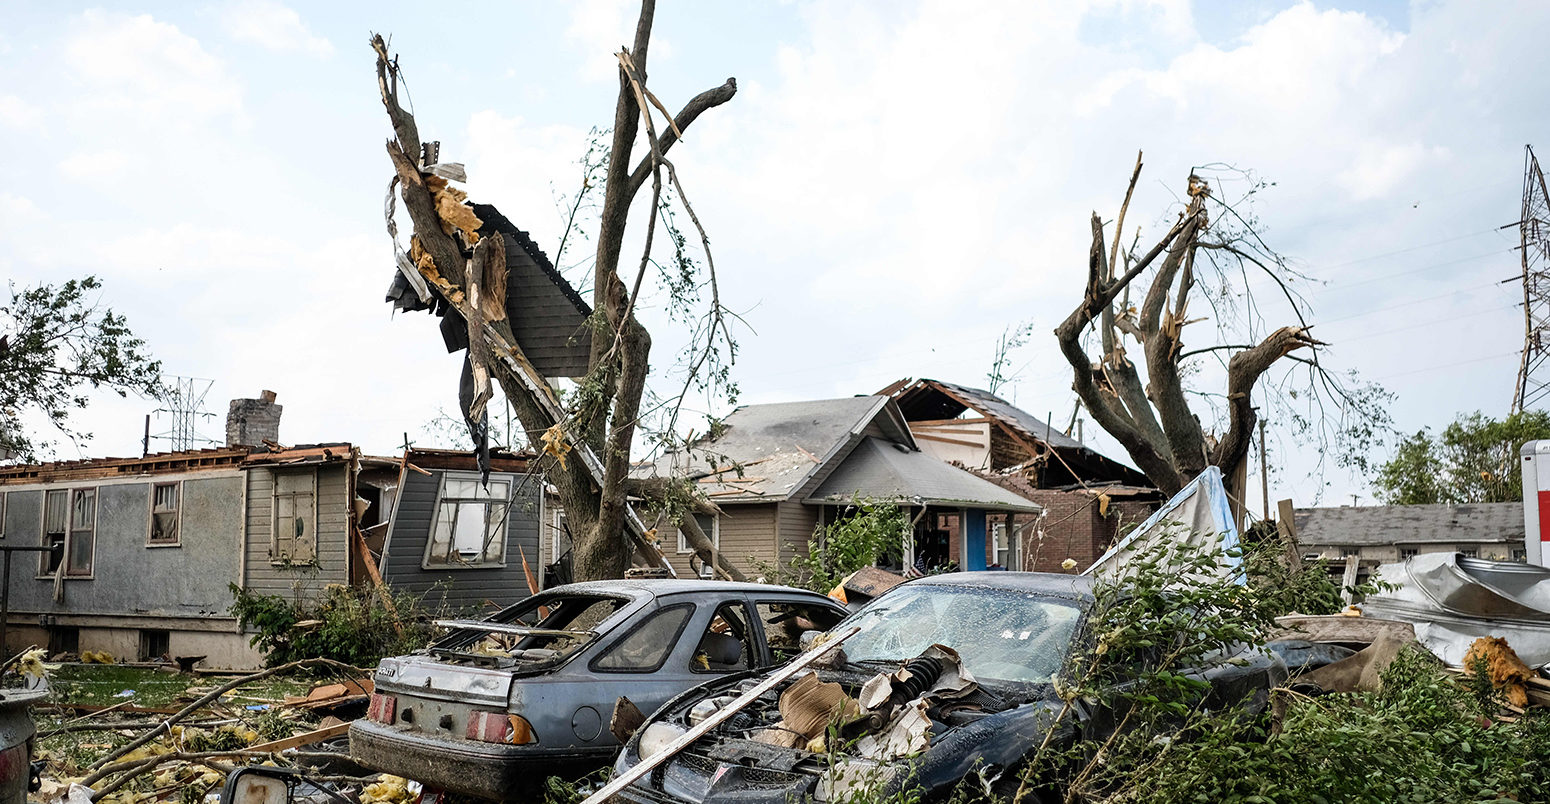 May 27, 2019, Dayton, Ohio, United States: Remains of houses and cars among debris after a tornado struck the area the night before. At least 1 person is dead and 12 injured from the storms that hit western Ohio.